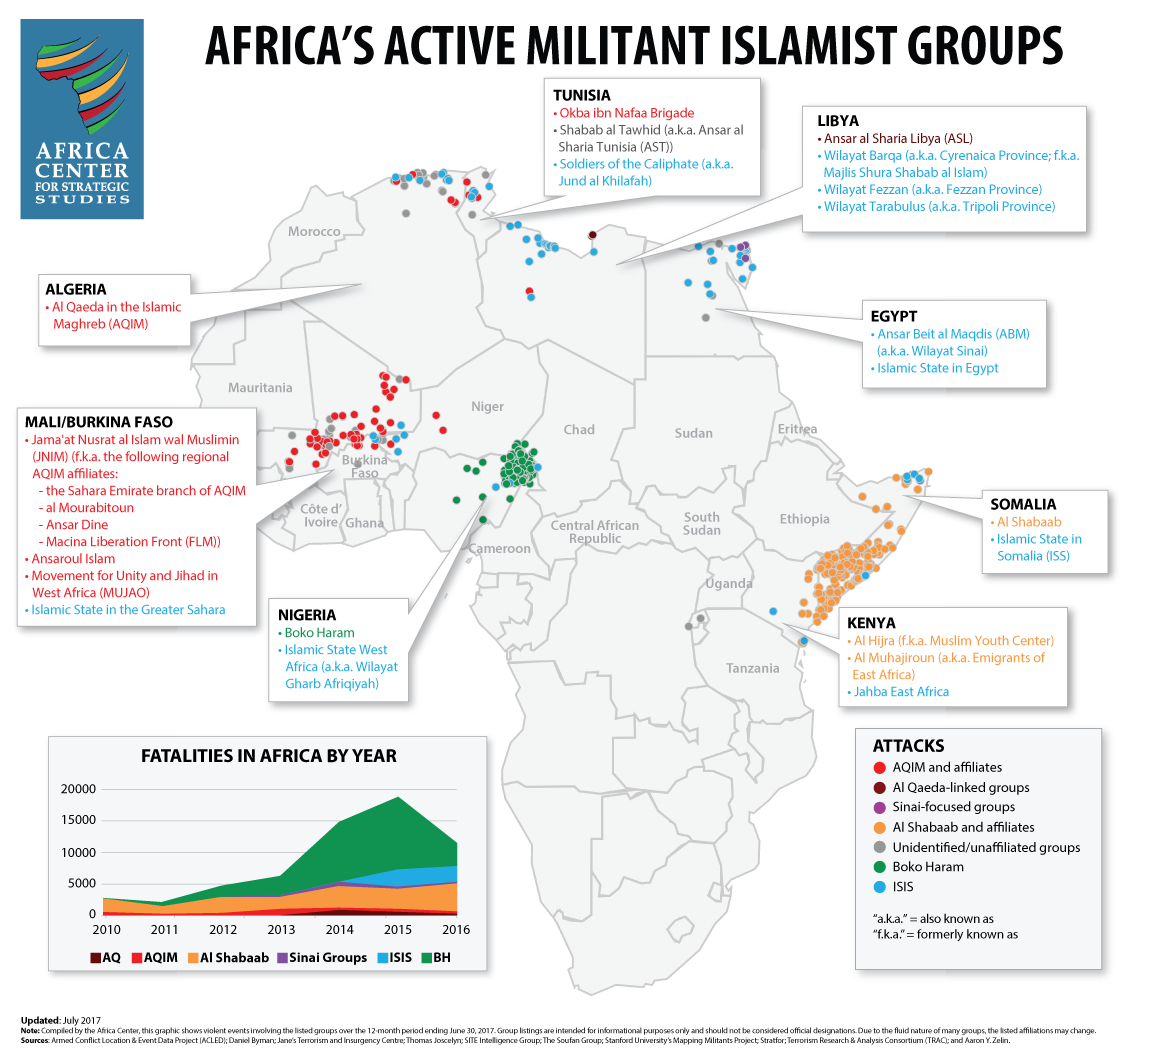 Africa's Militant Islamic Groups as of June 2017